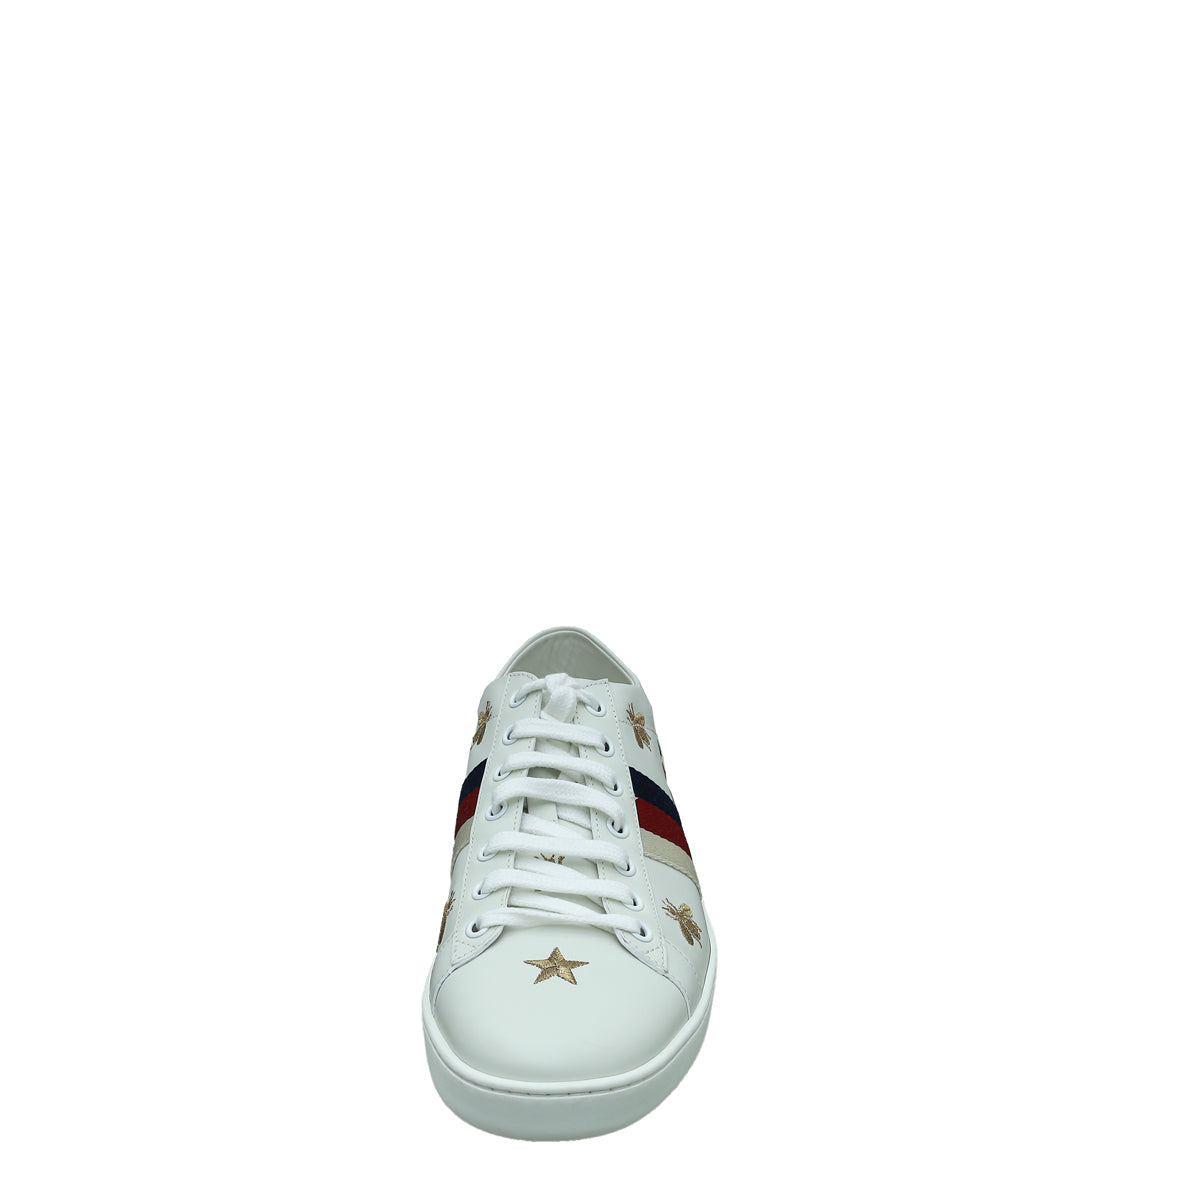 Gucci White Bees & Stars Ace Sneakers 41